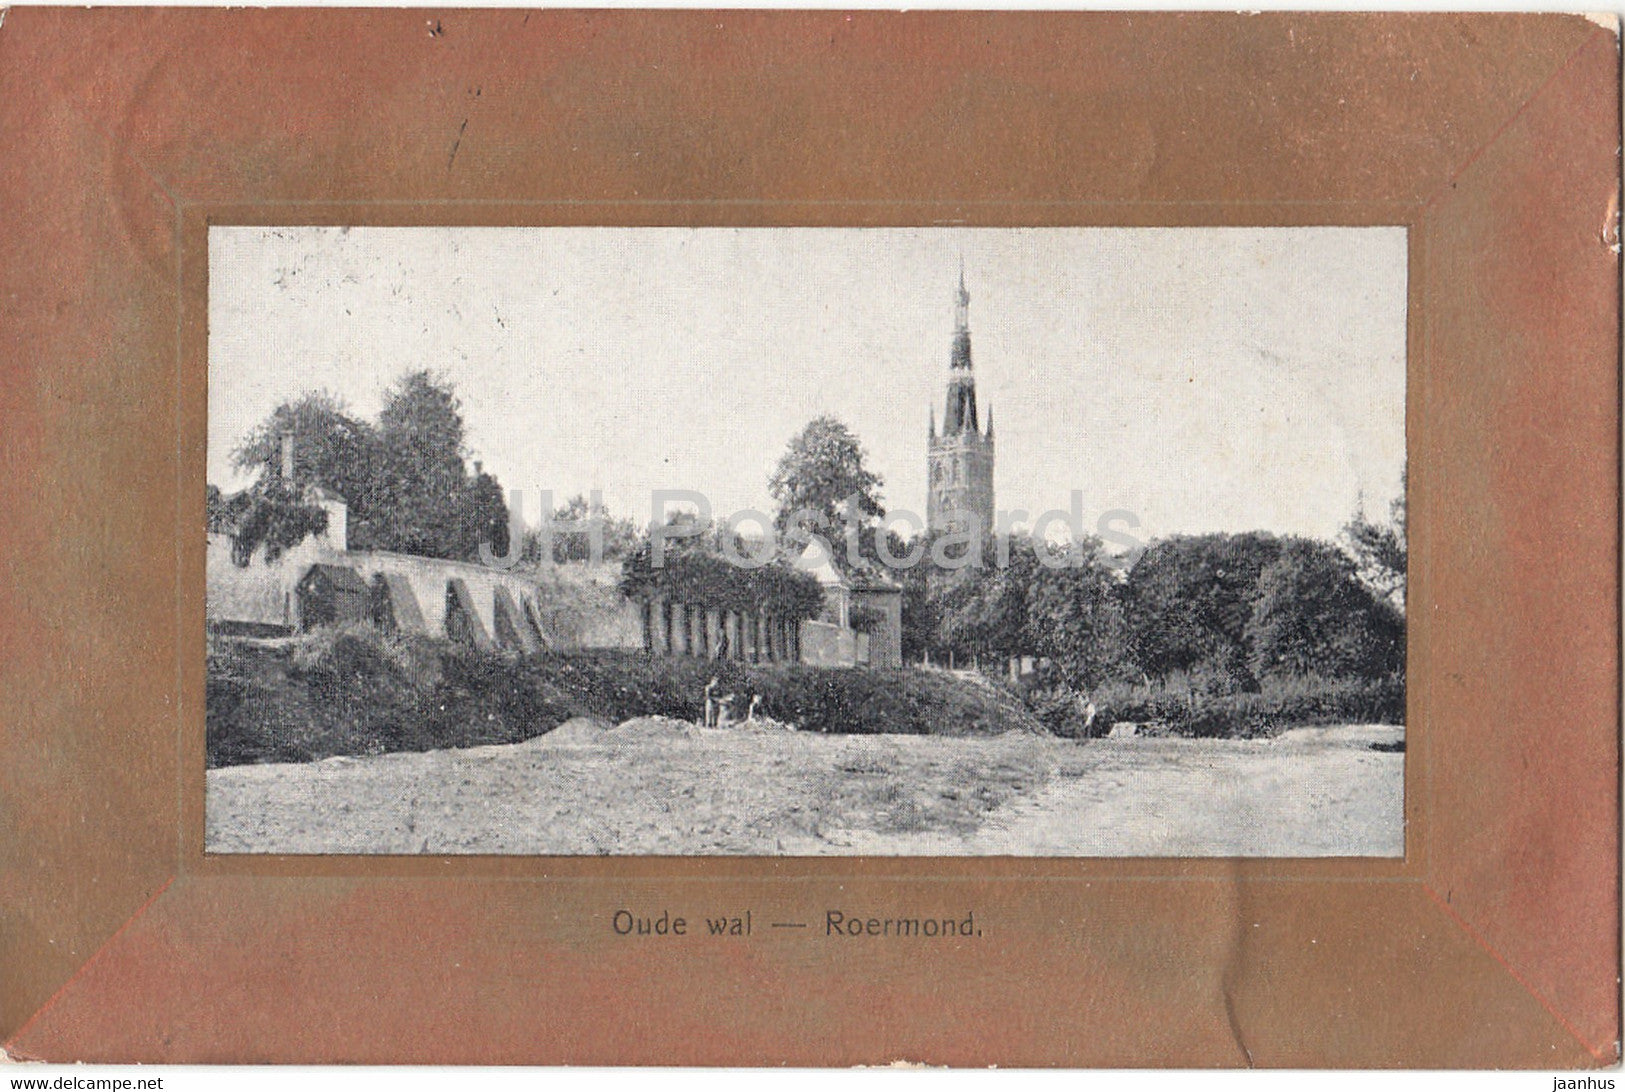 Roermond - Oude Wal - 3650 - old postcard - 1906 - Netherlands - used - JH Postcards